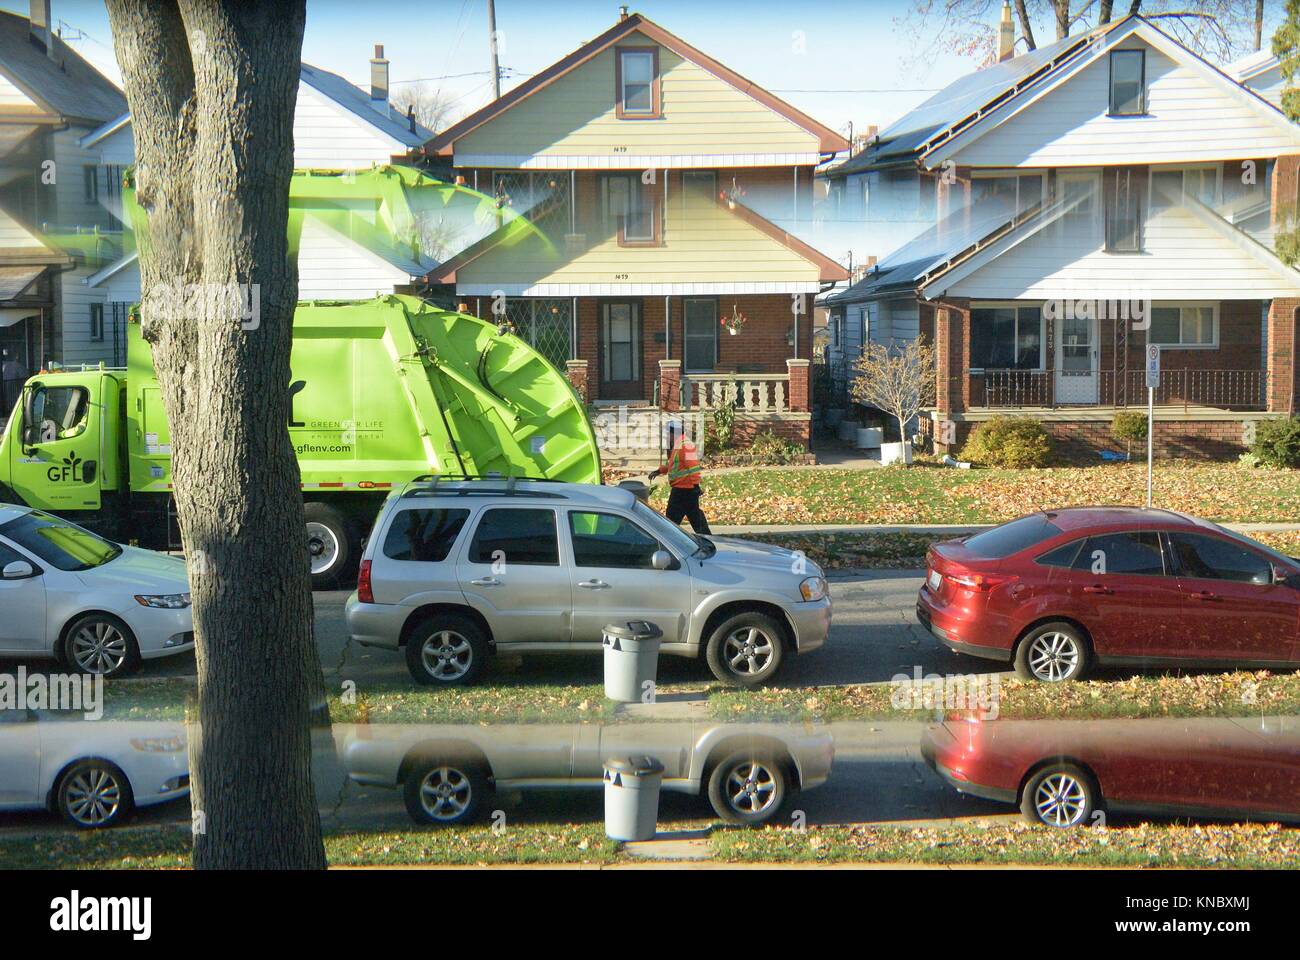 Garbage pick up day as seen through a front door window giving a split image, Windsor, Ontario. Stock Photo